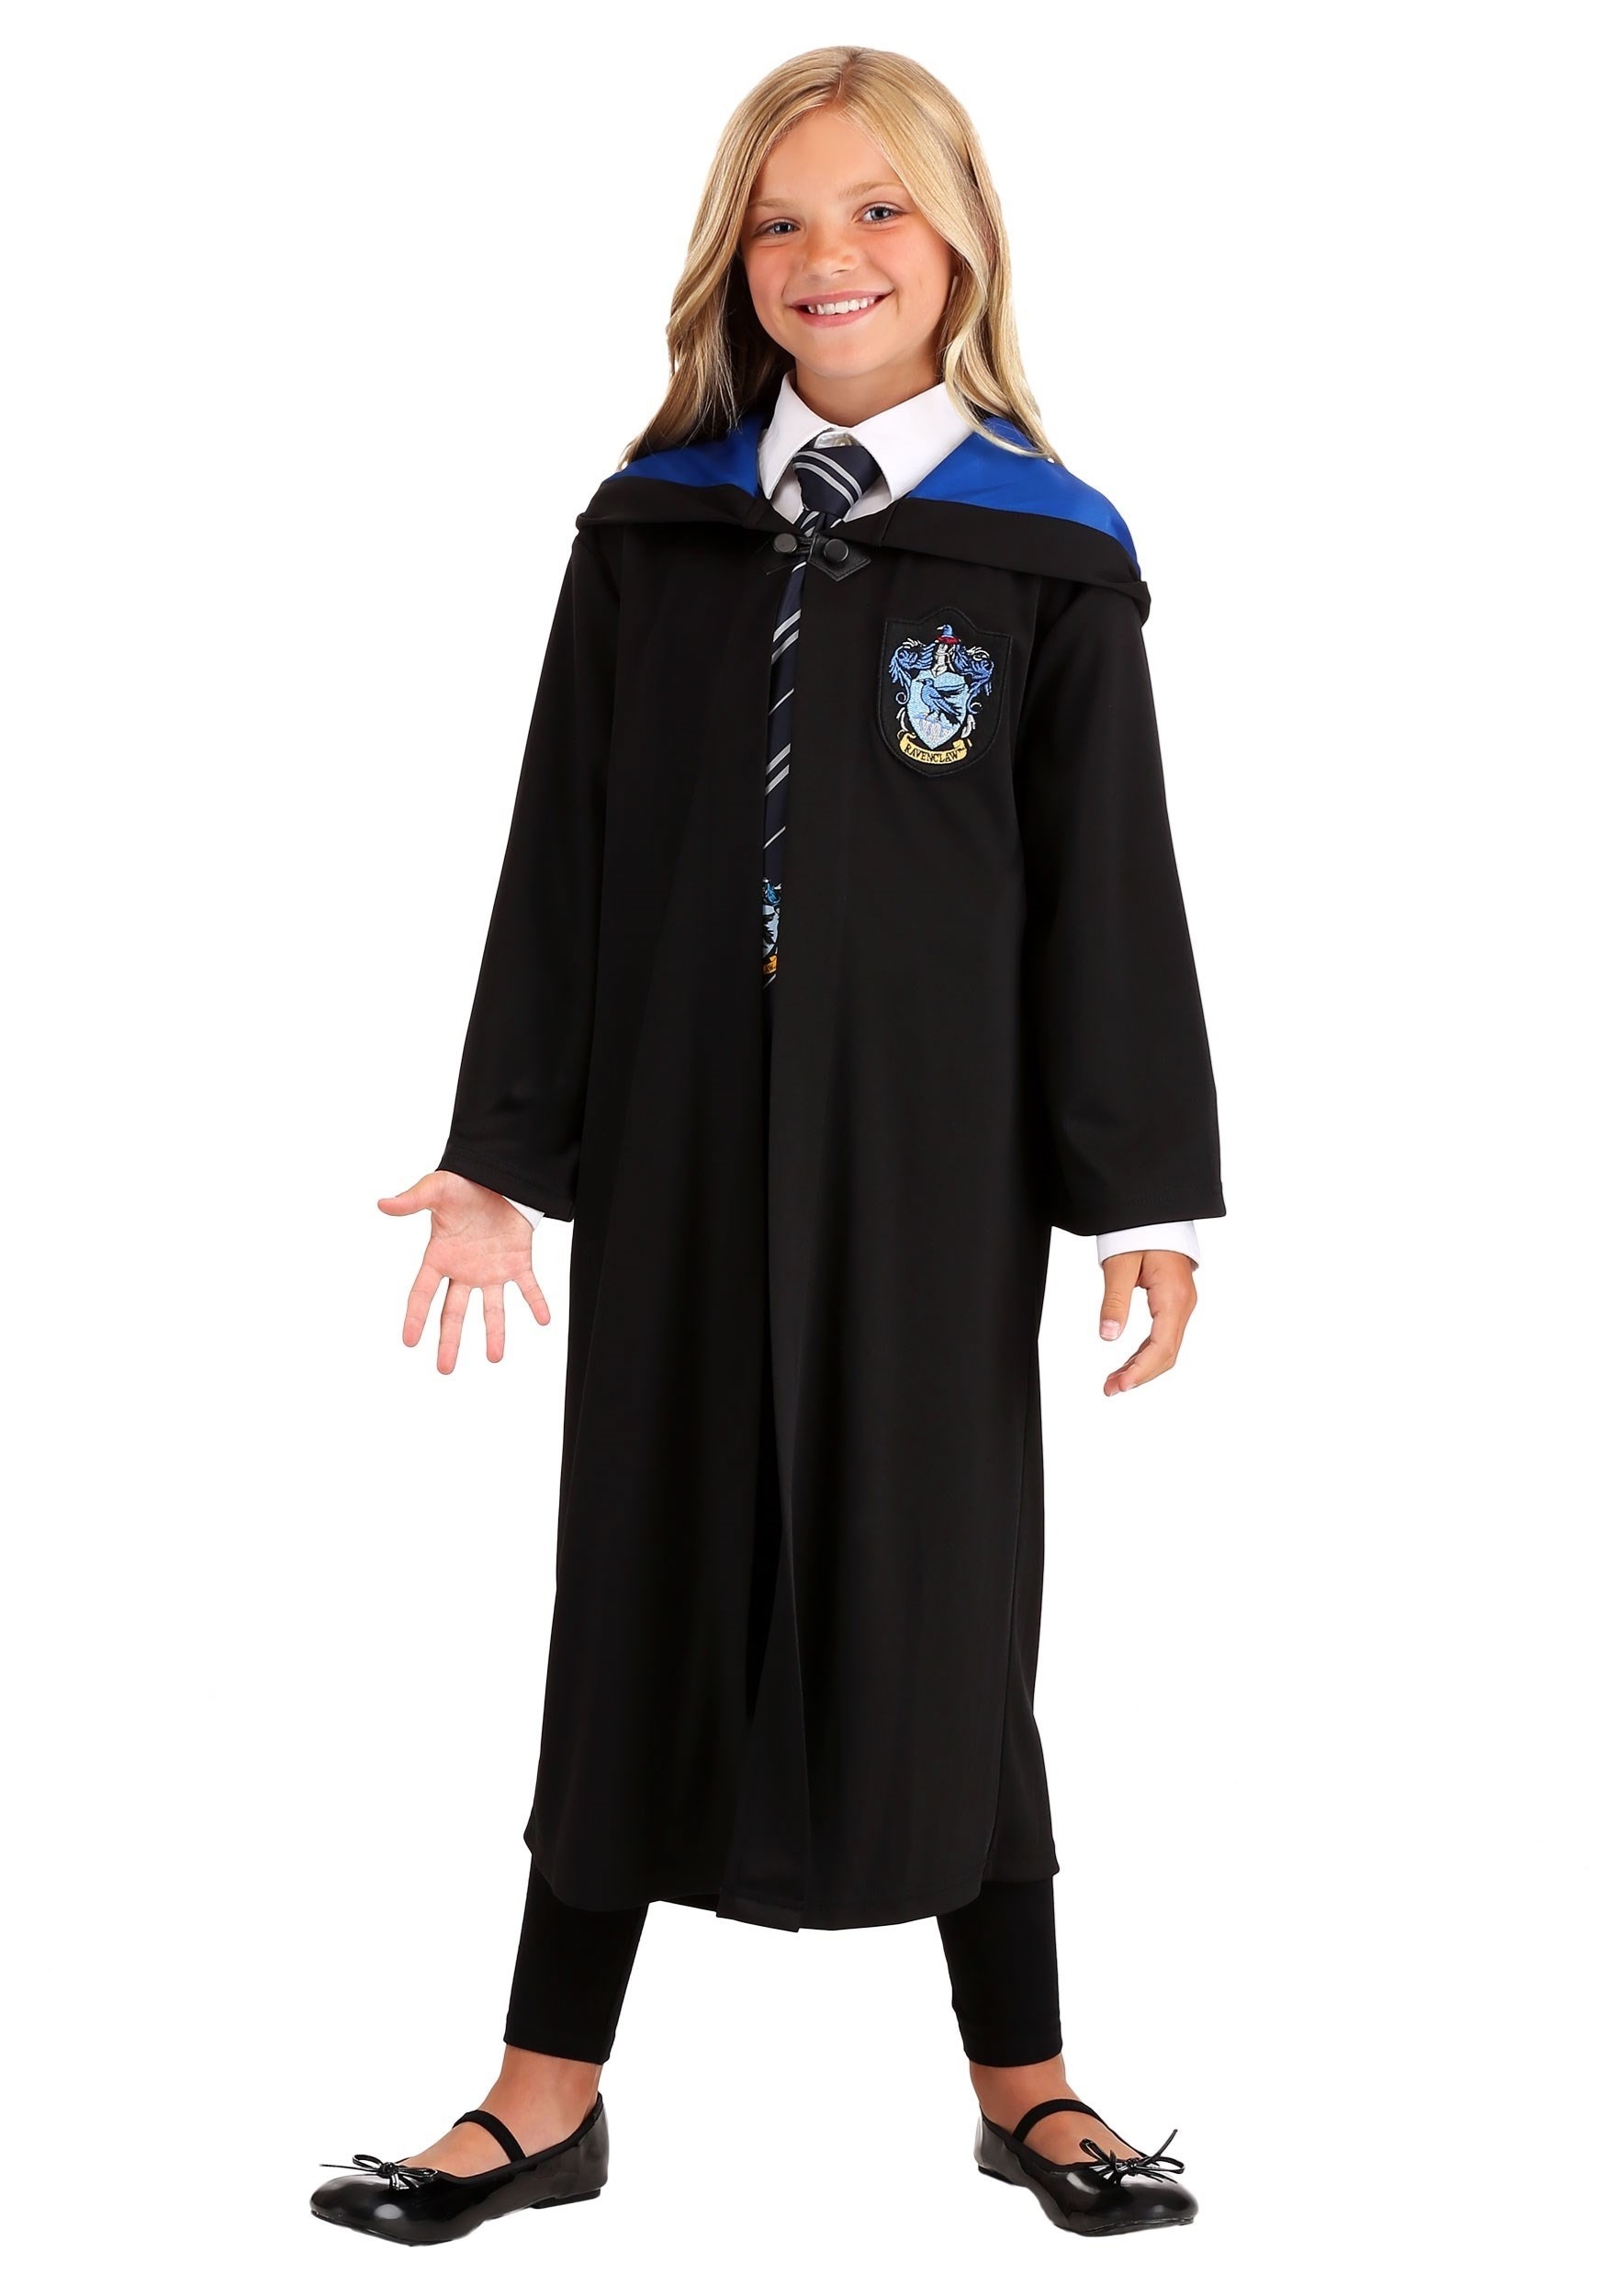 Harry Potter - Ravenclaw Robe Adult Costume